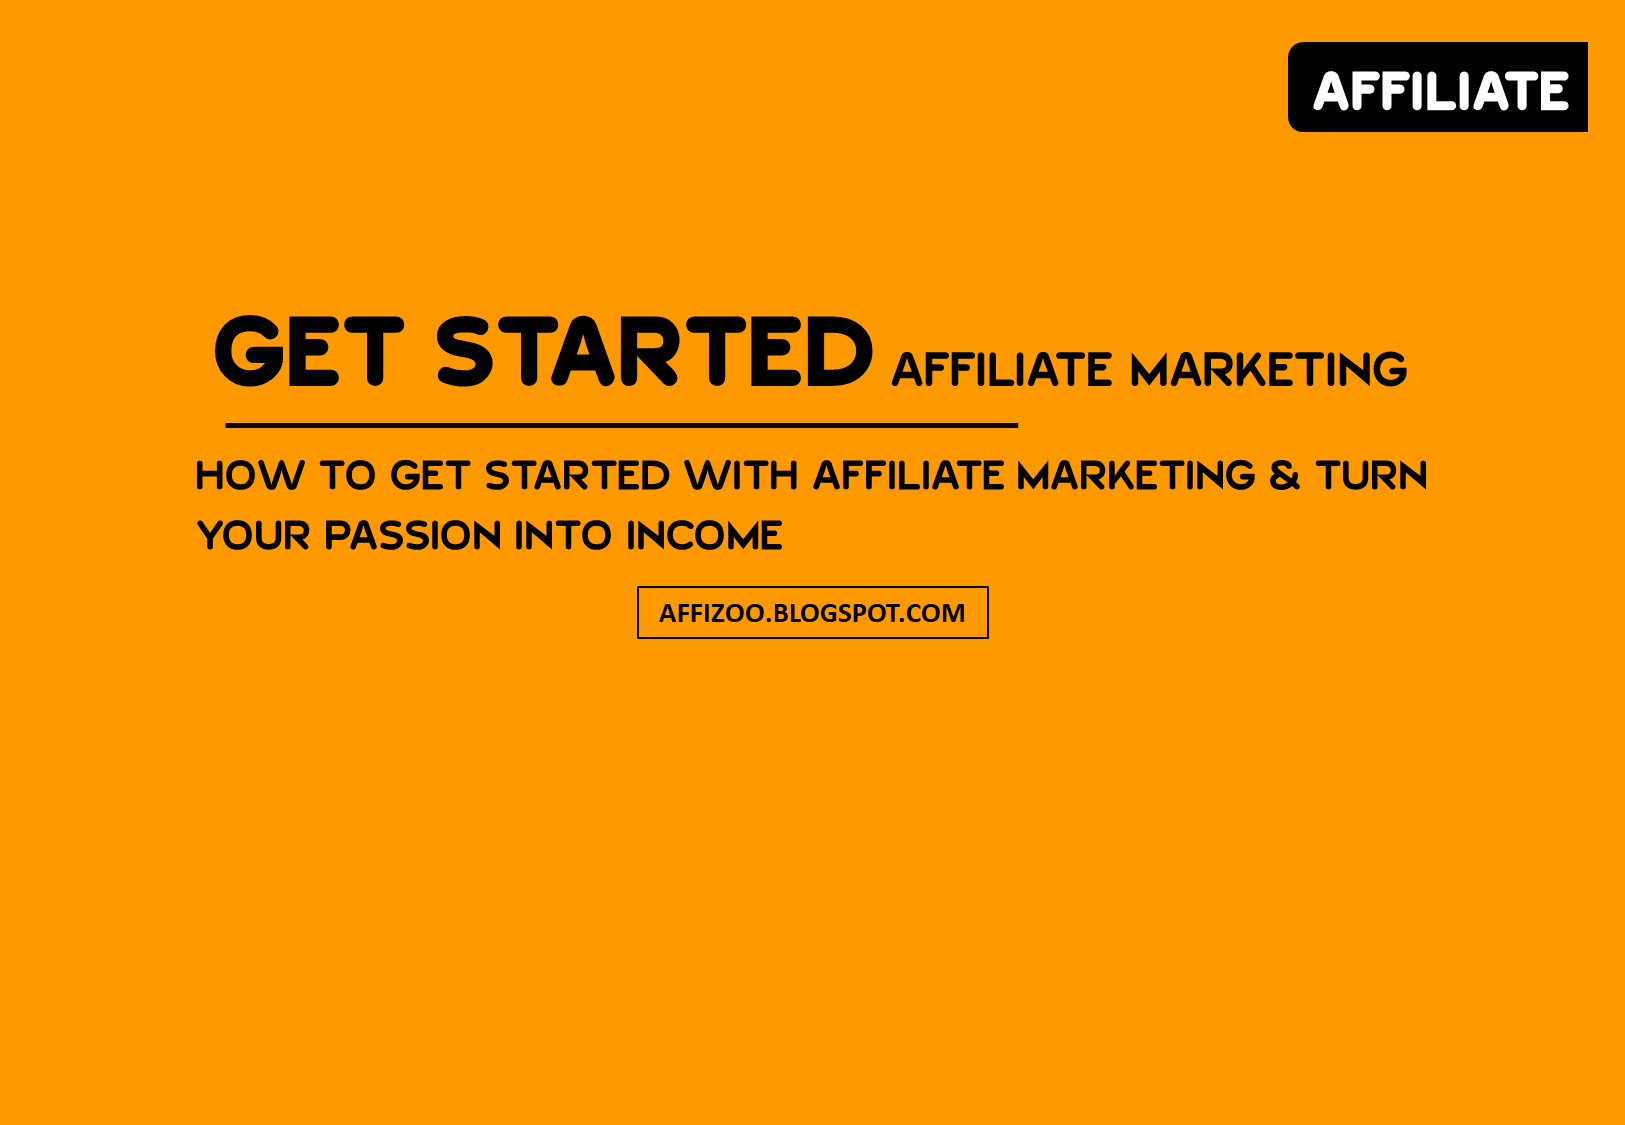 How To Get Started With Affiliate Marketing & How To Make It Successful?